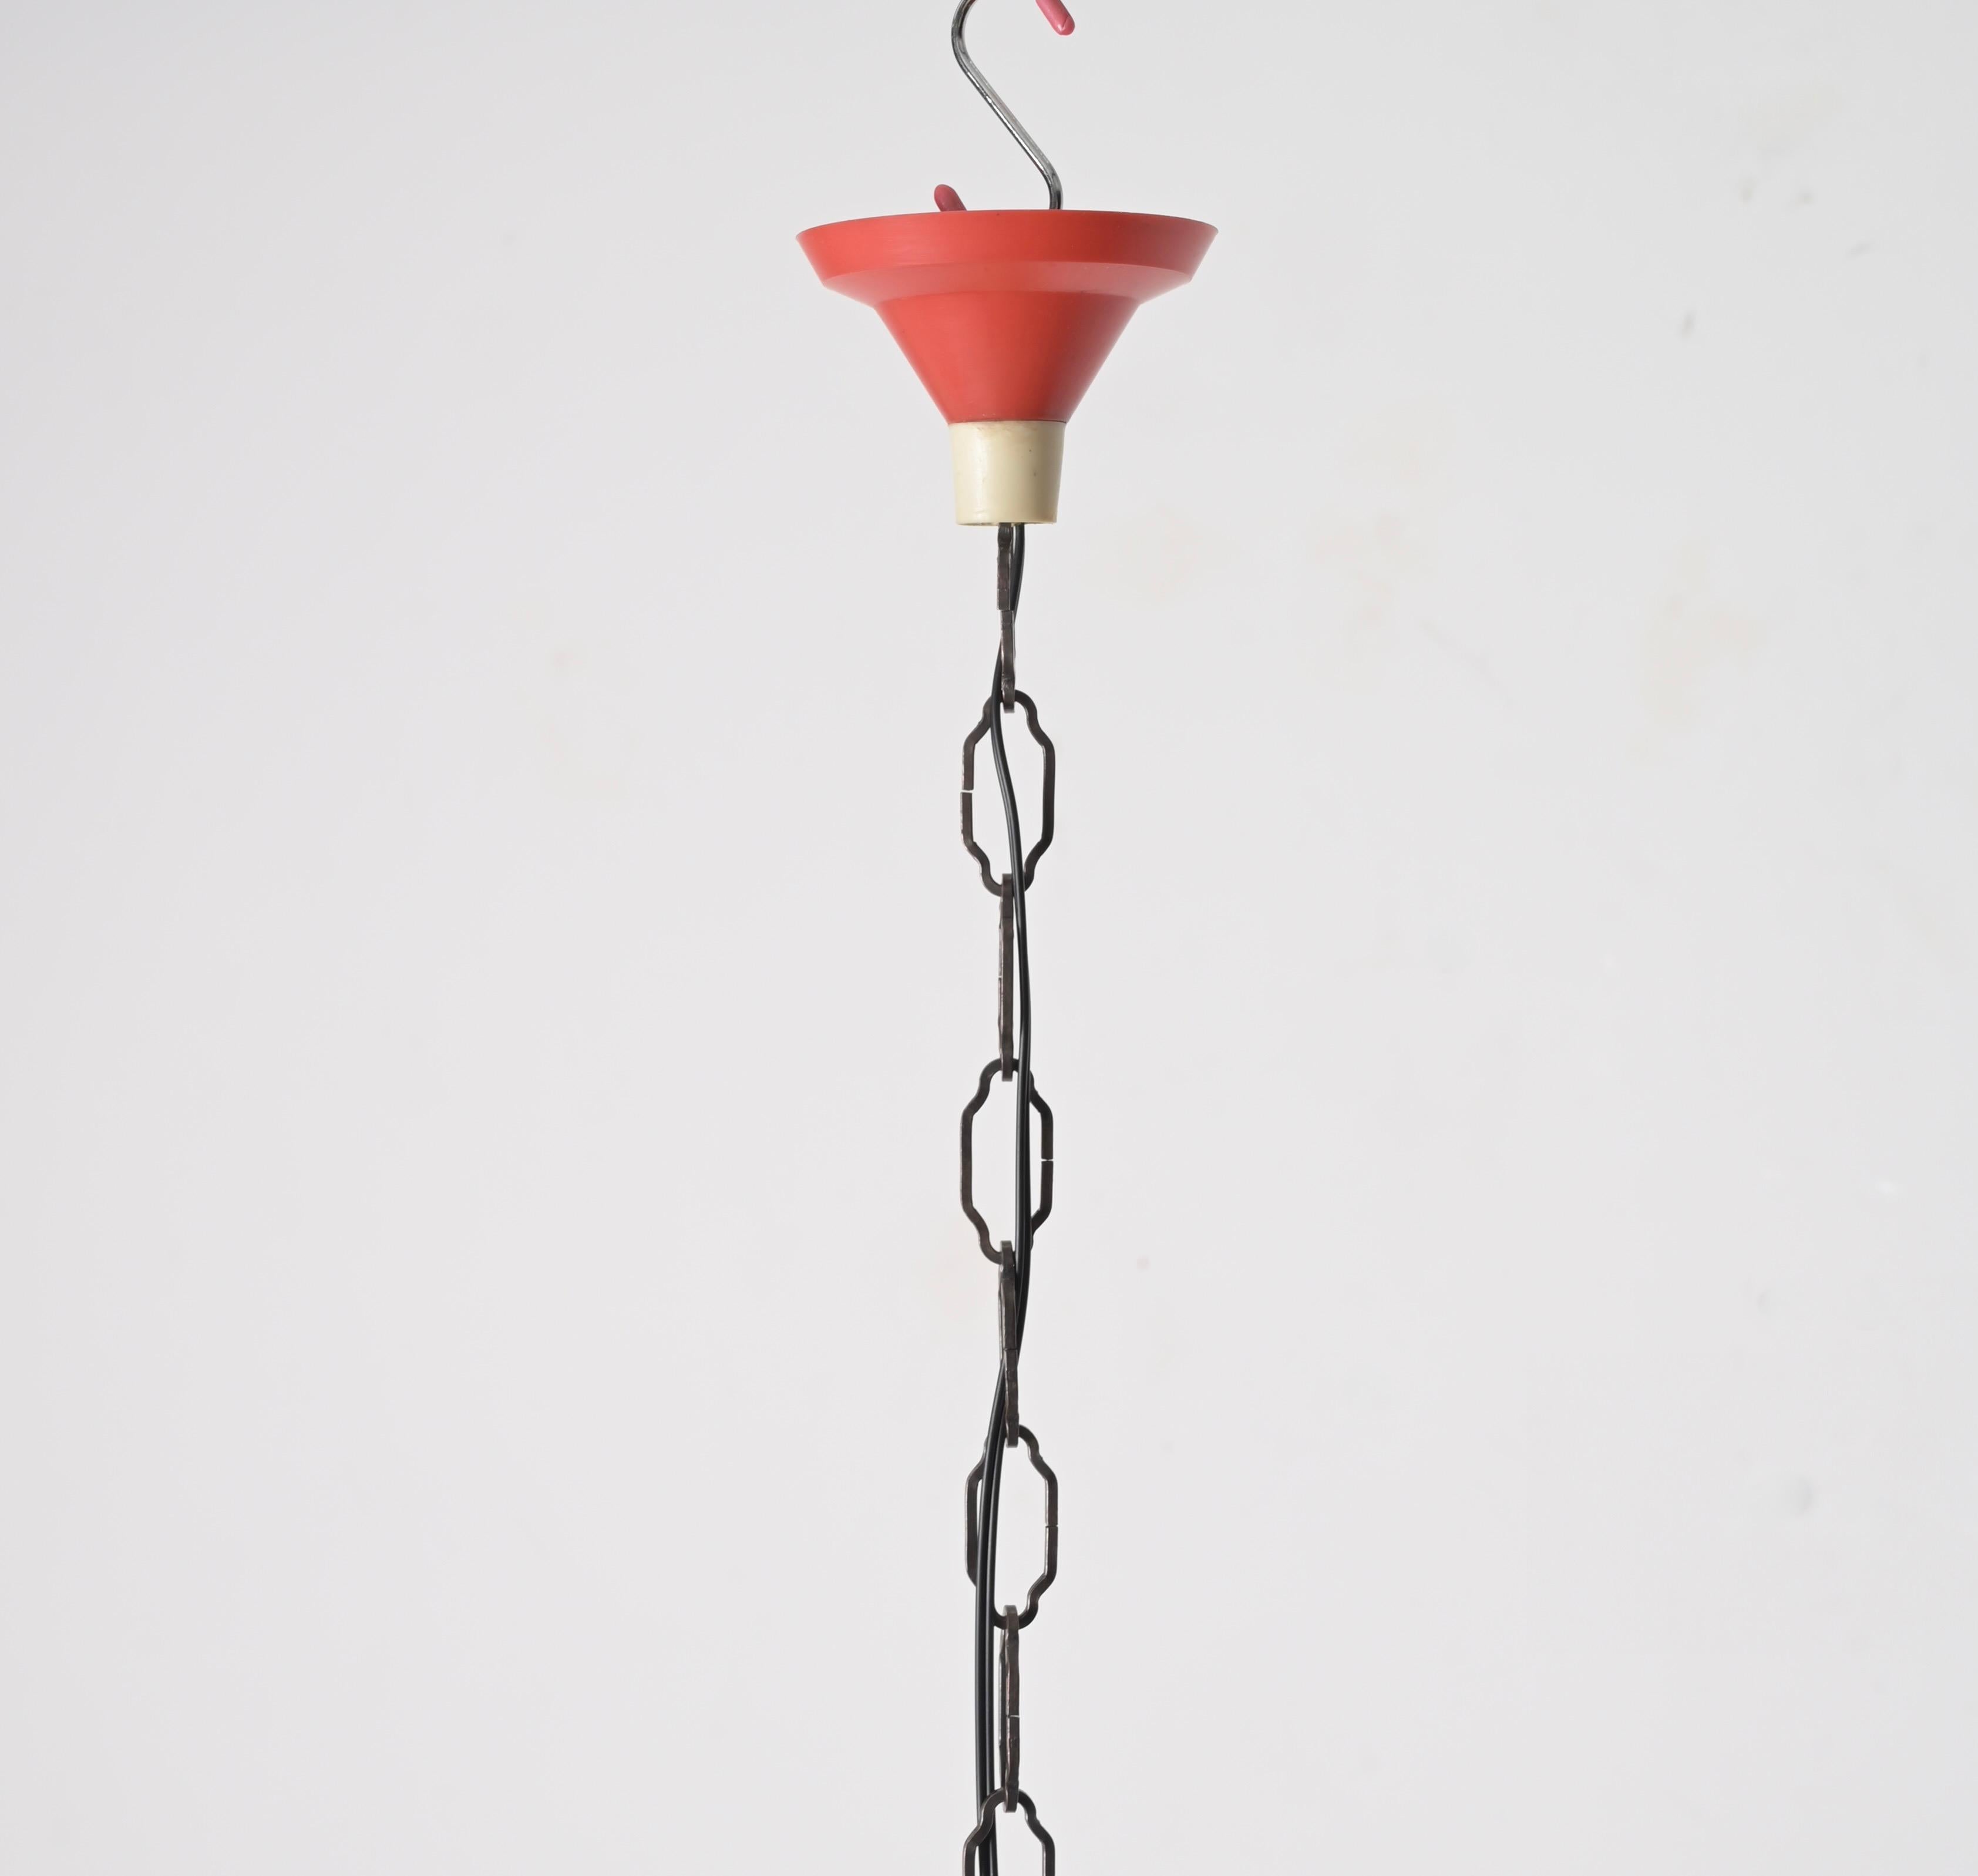 Mathieu Matégot Pendant Lamps in Opal Glass, Red Metal, 1950s French Lighting For Sale 5